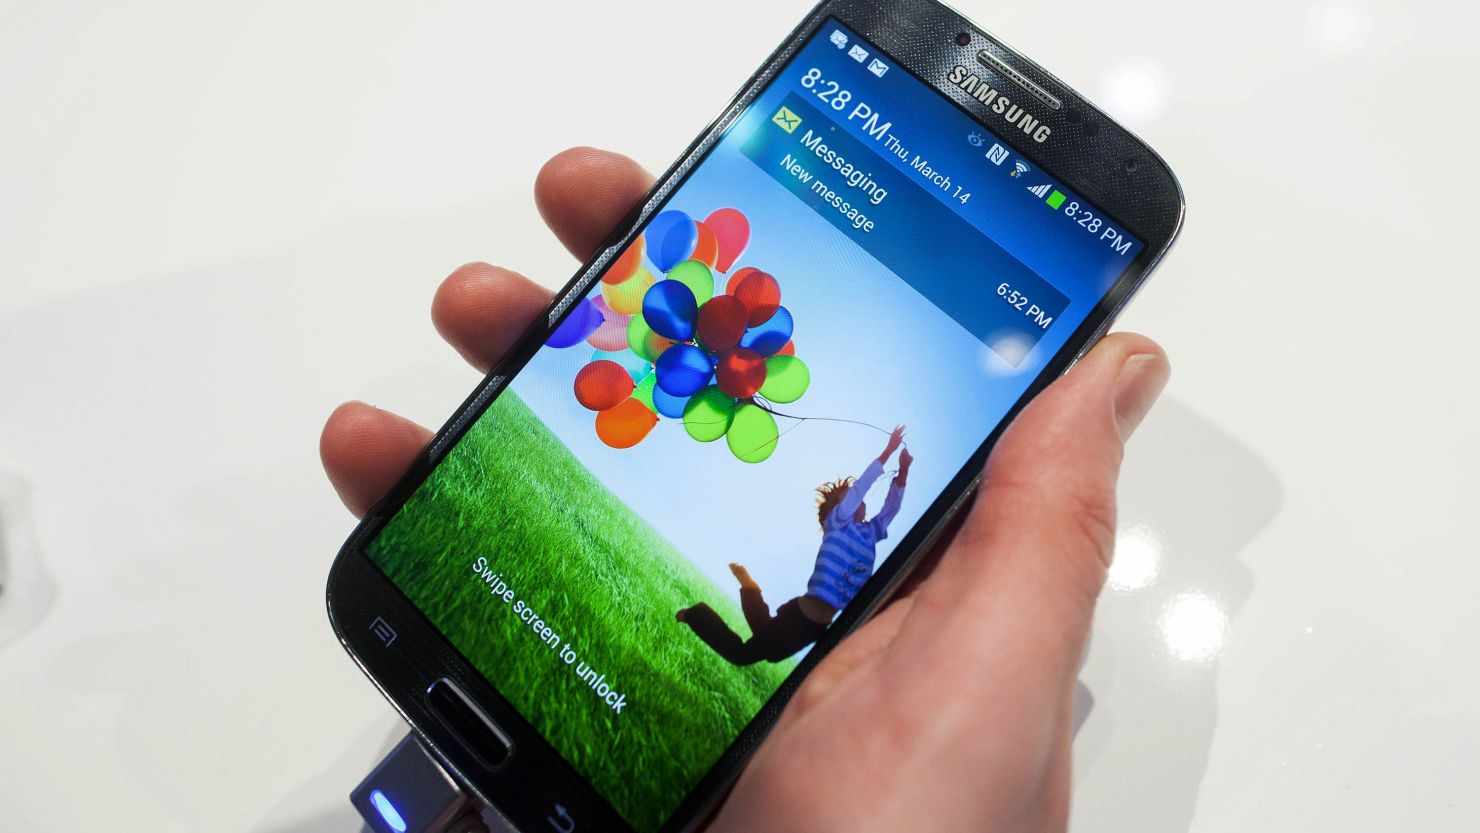 The upcoming Samsung Galaxy IV phone will have a 5-inch screen, up .2 of an inch from the previous model.